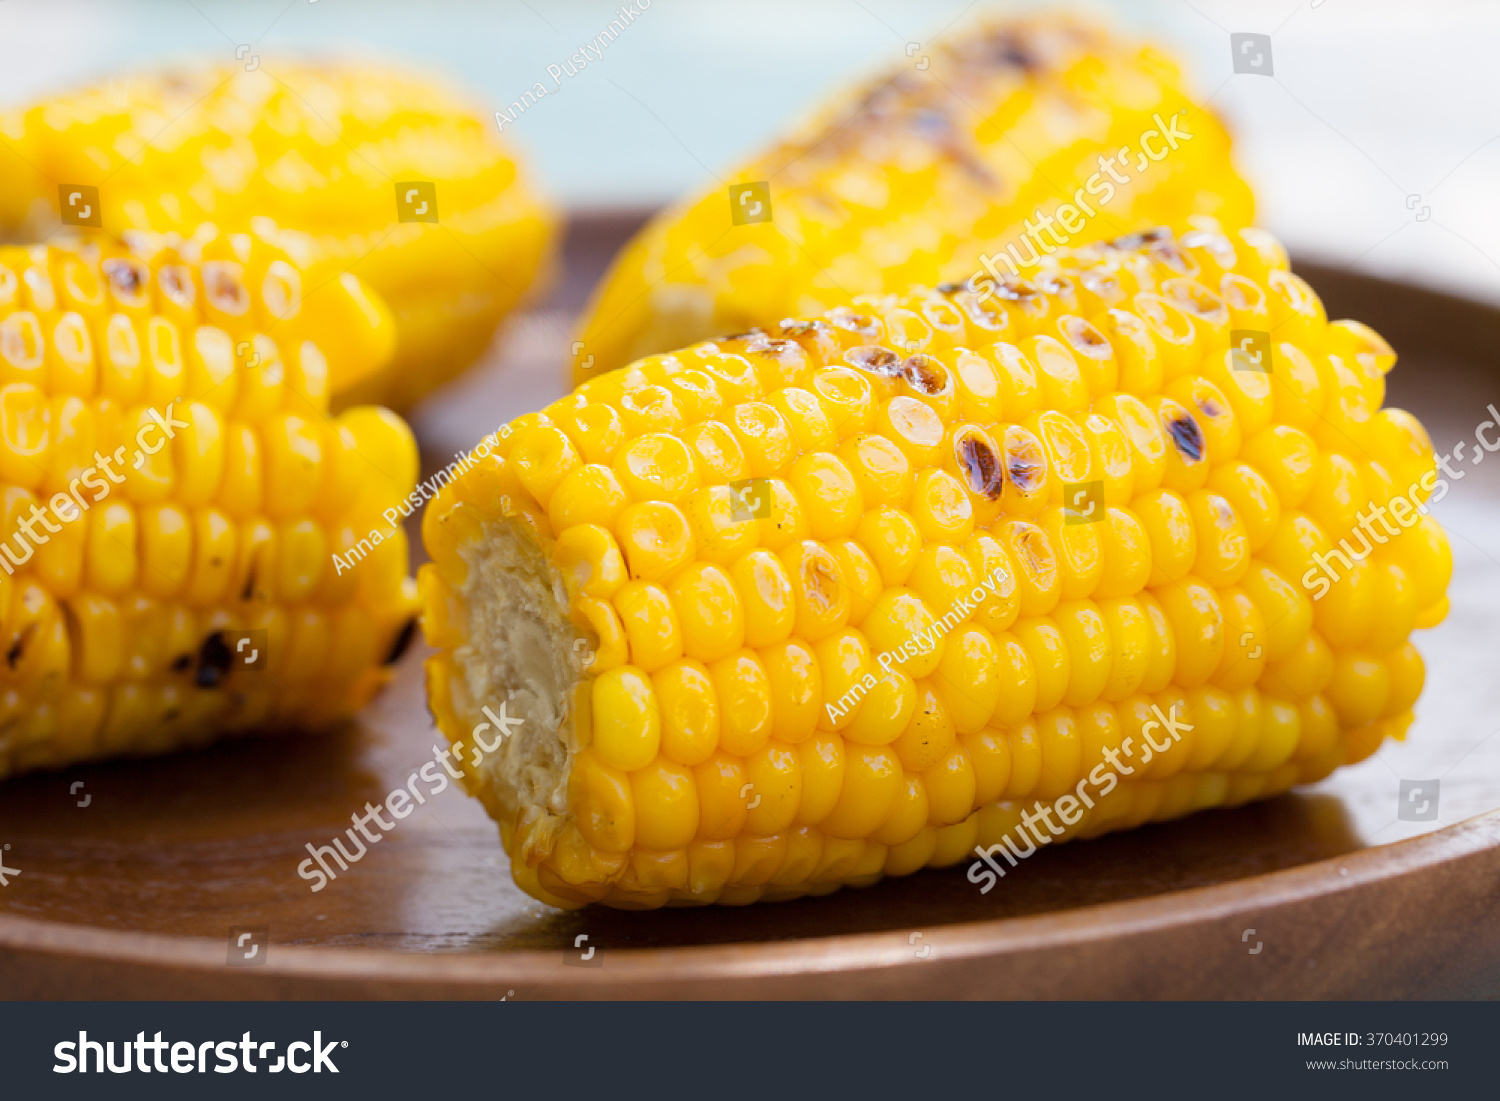 Grilled corn on the cob with salt and butter on a wooden plate  #370401299